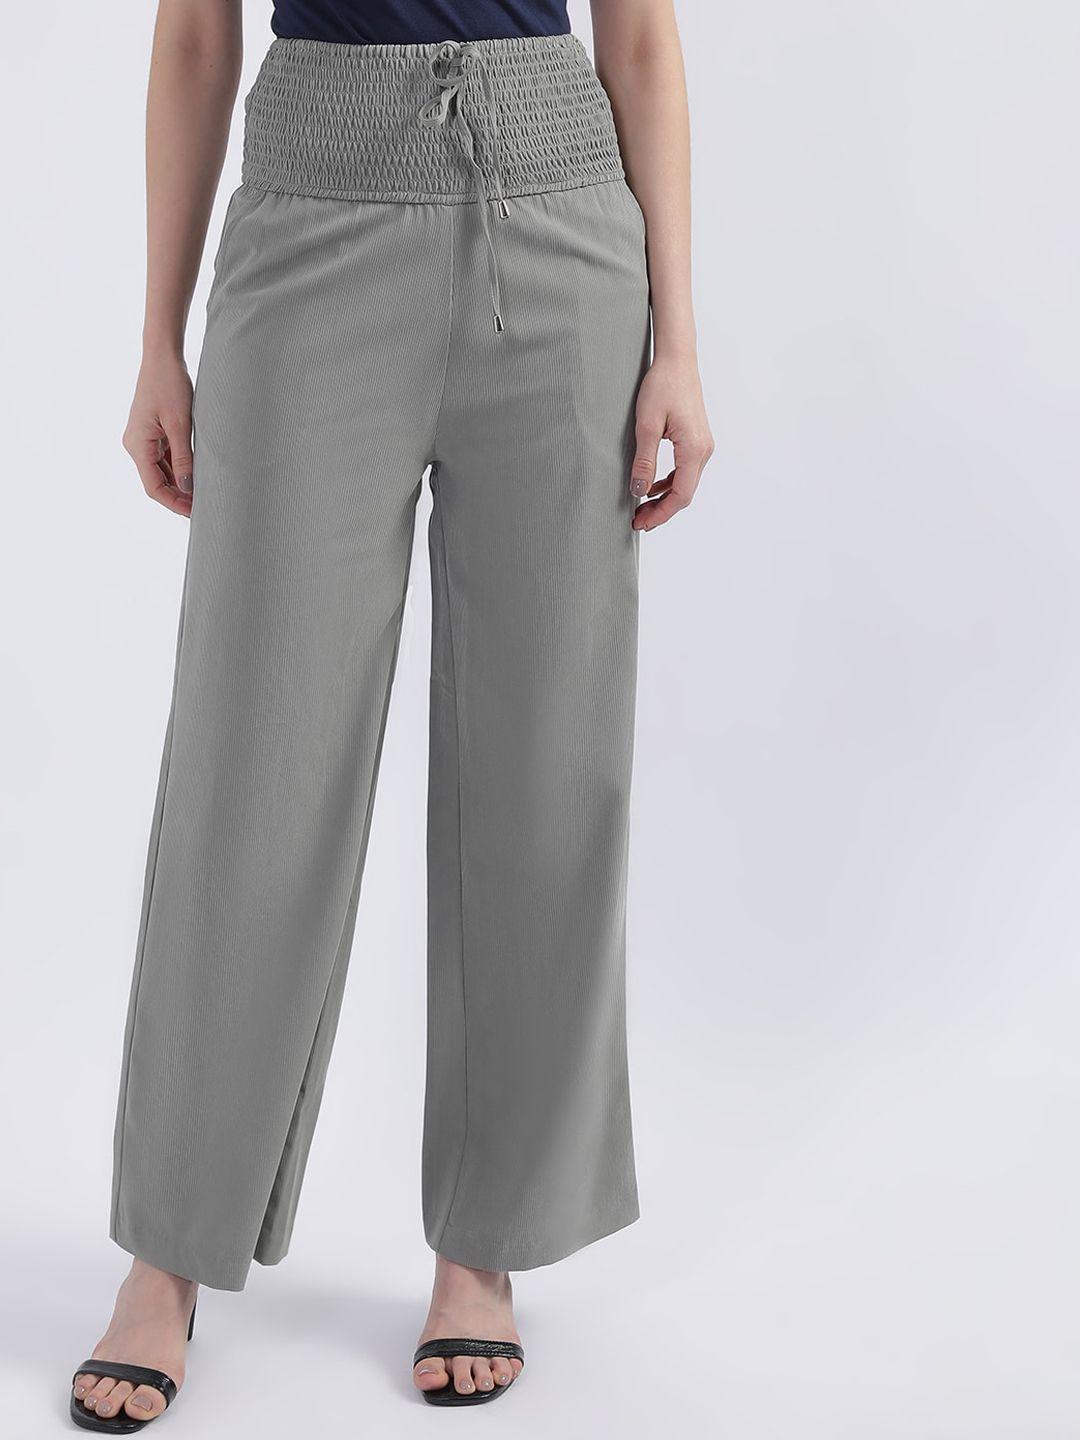 centrestage women sea green flared high-rise trousers